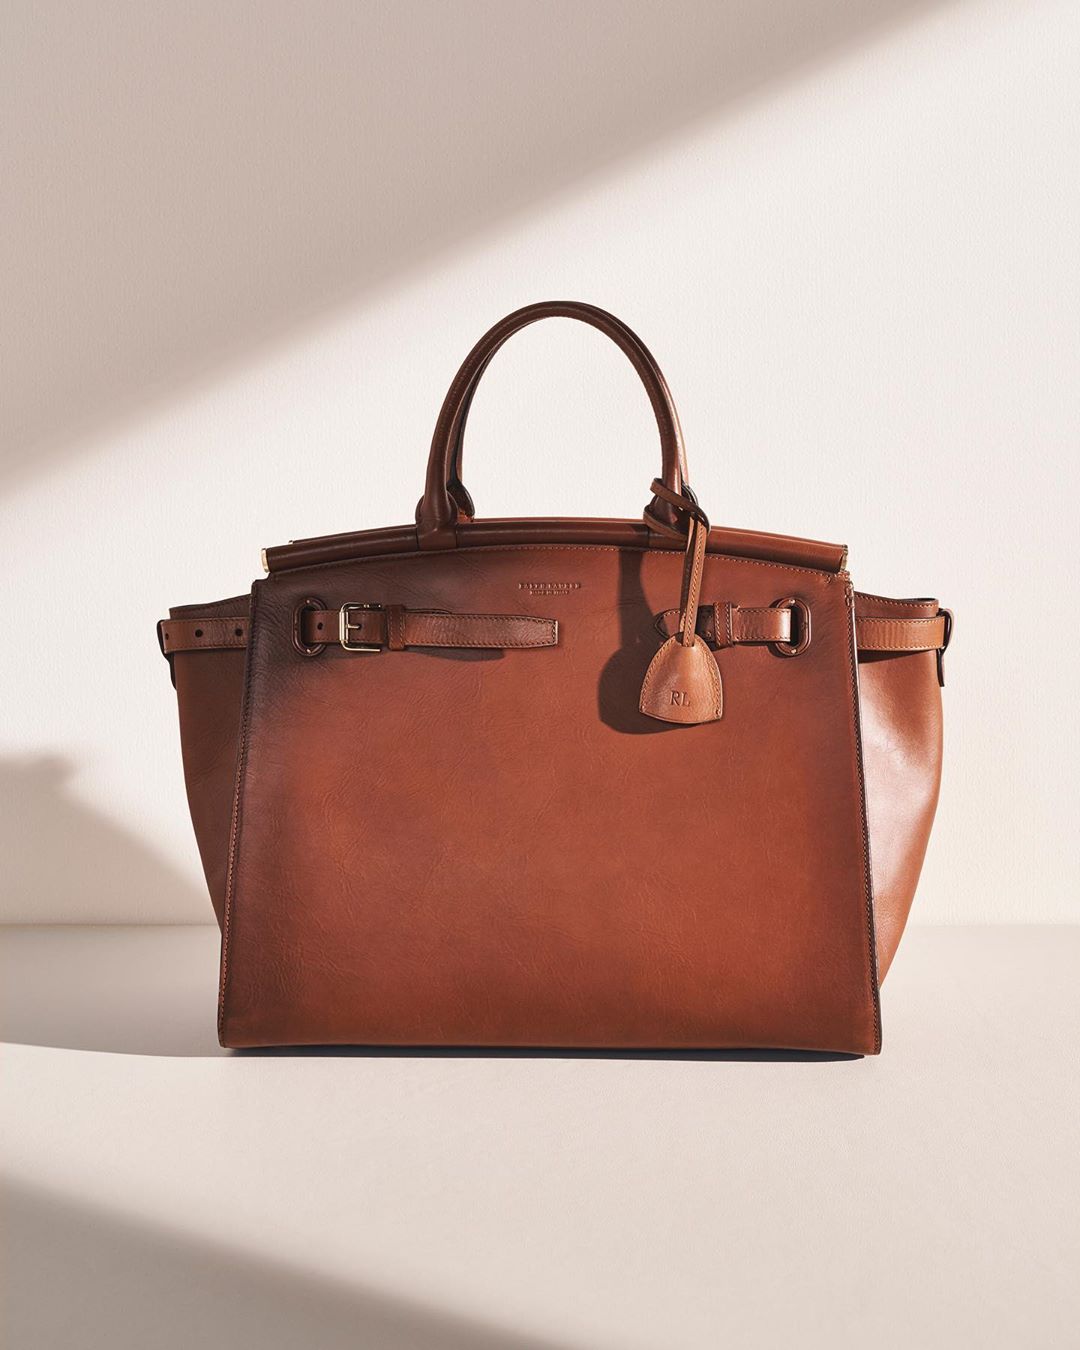 A new icon embodying the signatures of #RalphLauren design. Each RL50 Handbag is entirely handcrafted in an artisanal Italian studio — from its elegant, effortlessly functional silhouette to hand-painted edges and stitch details subtly referencing the construction of equestrian bridle straps. Discover #TheRL50 collection at